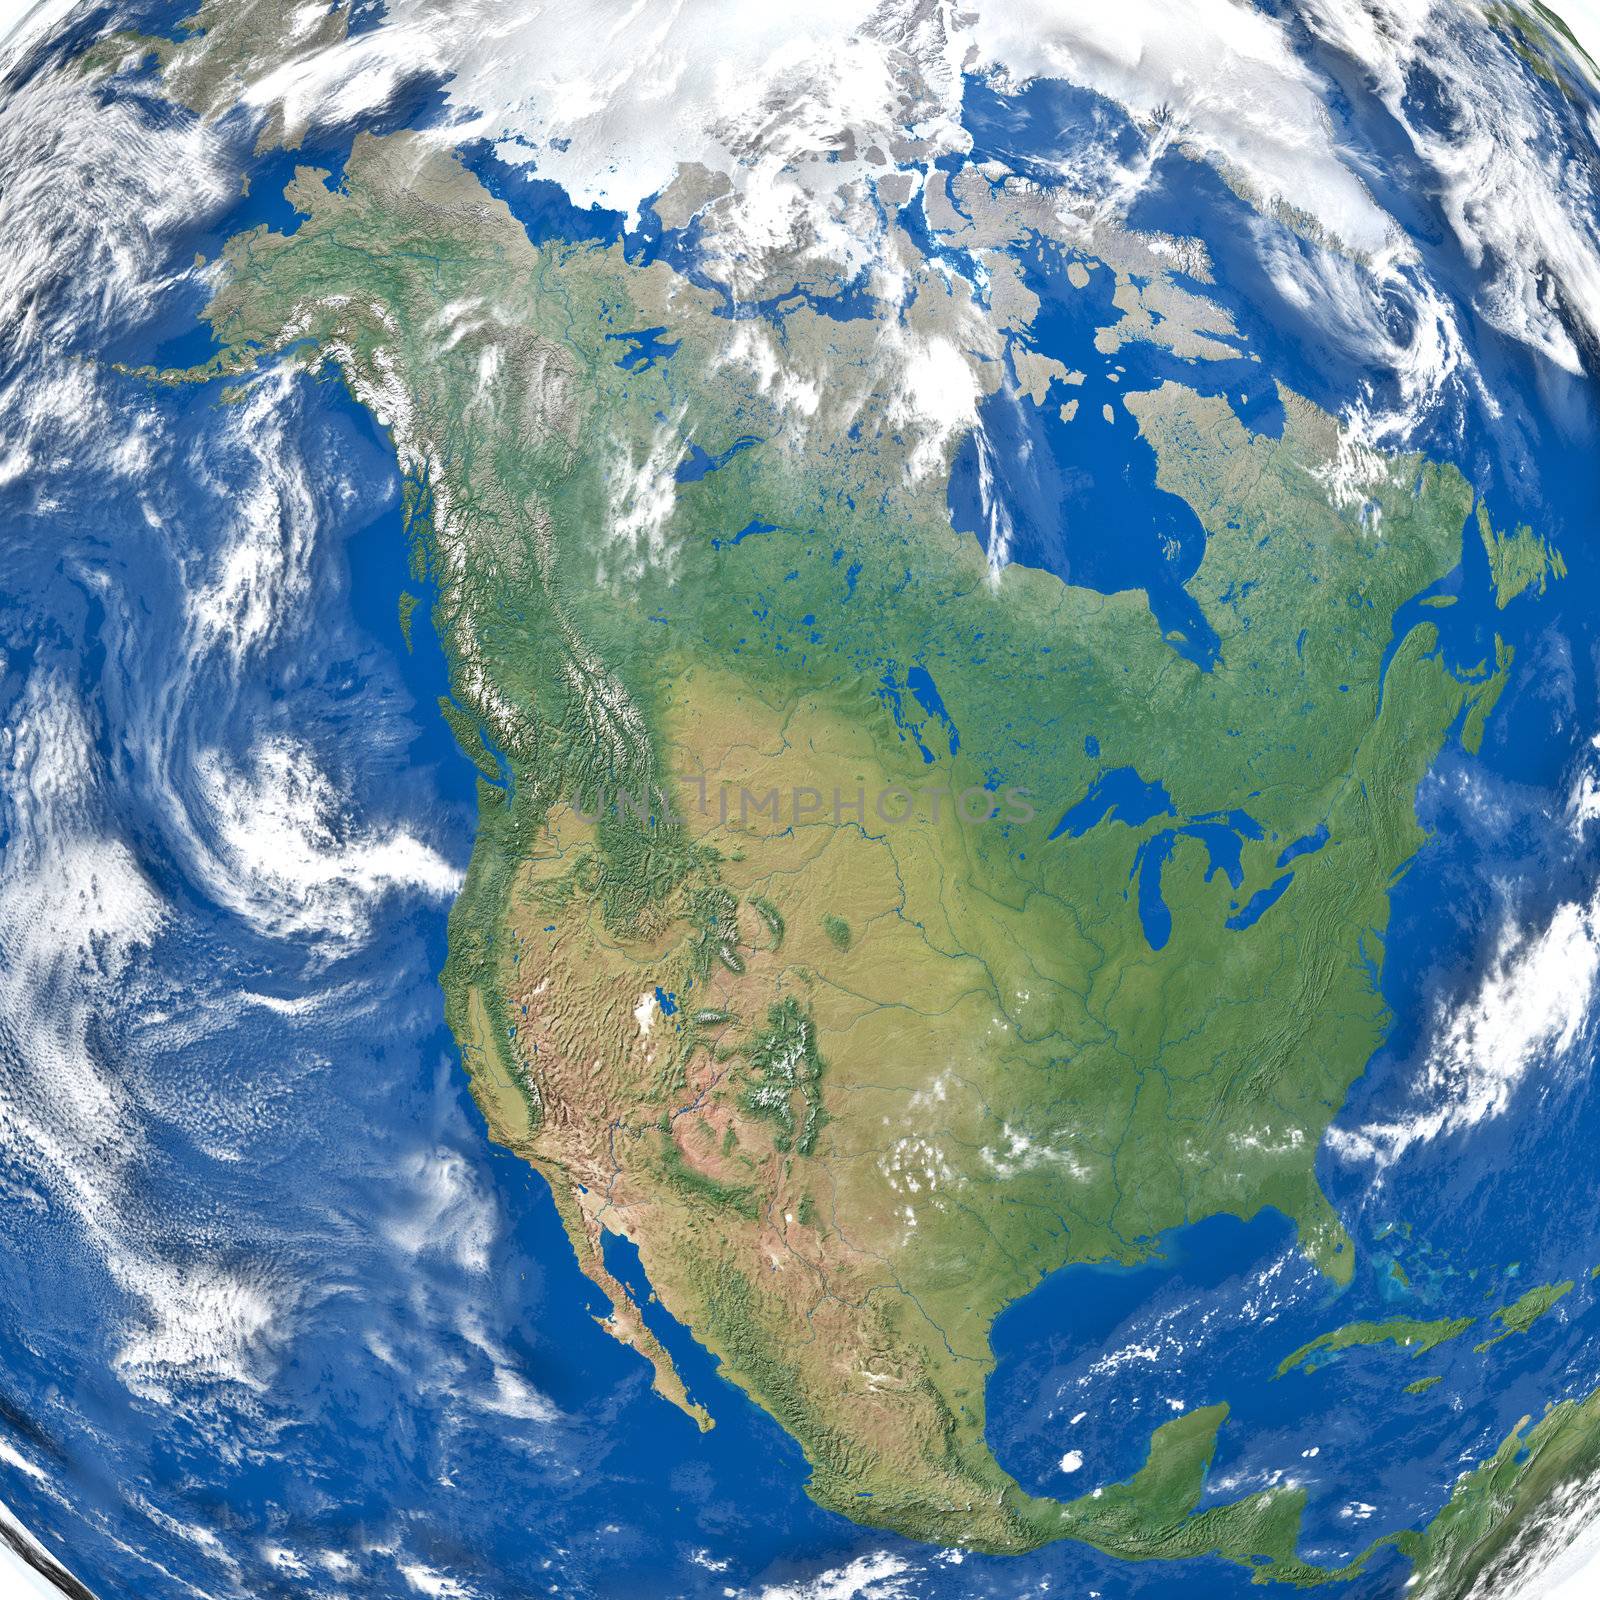 Detailed illustration of North America. Texture of the Earth surface, relief and clouds provided by visibleearth.nasa.gov